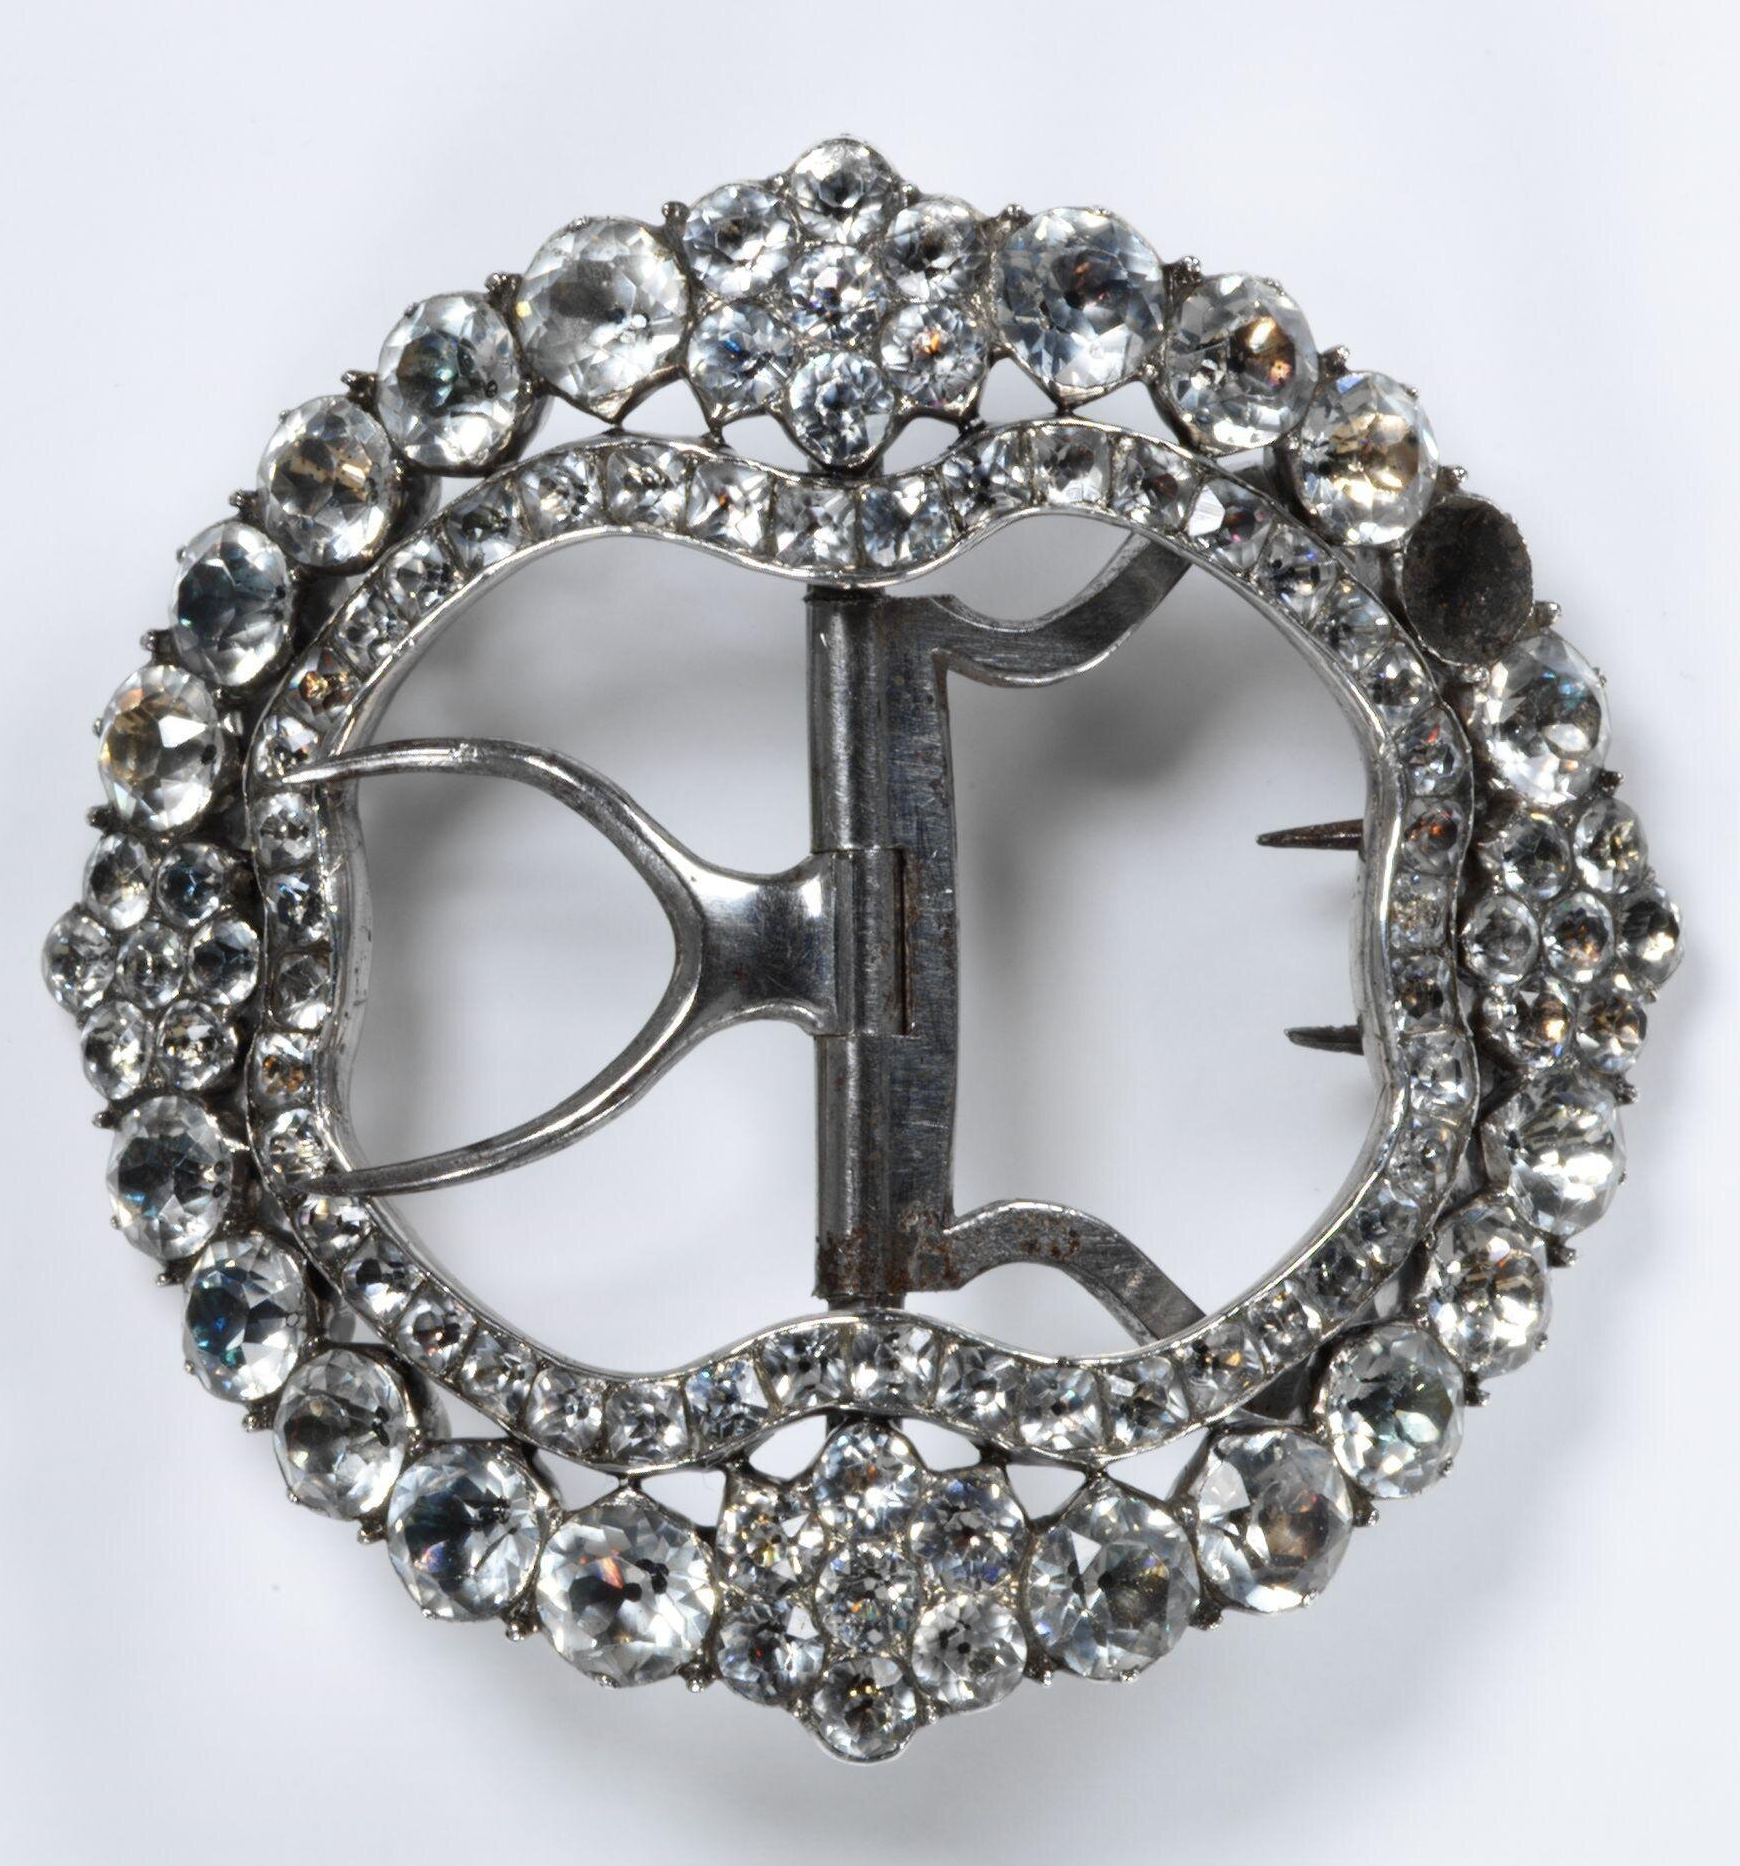 Silver shoe buckle set with pastes, English, 1770. The Victoria and Albert Museum. 